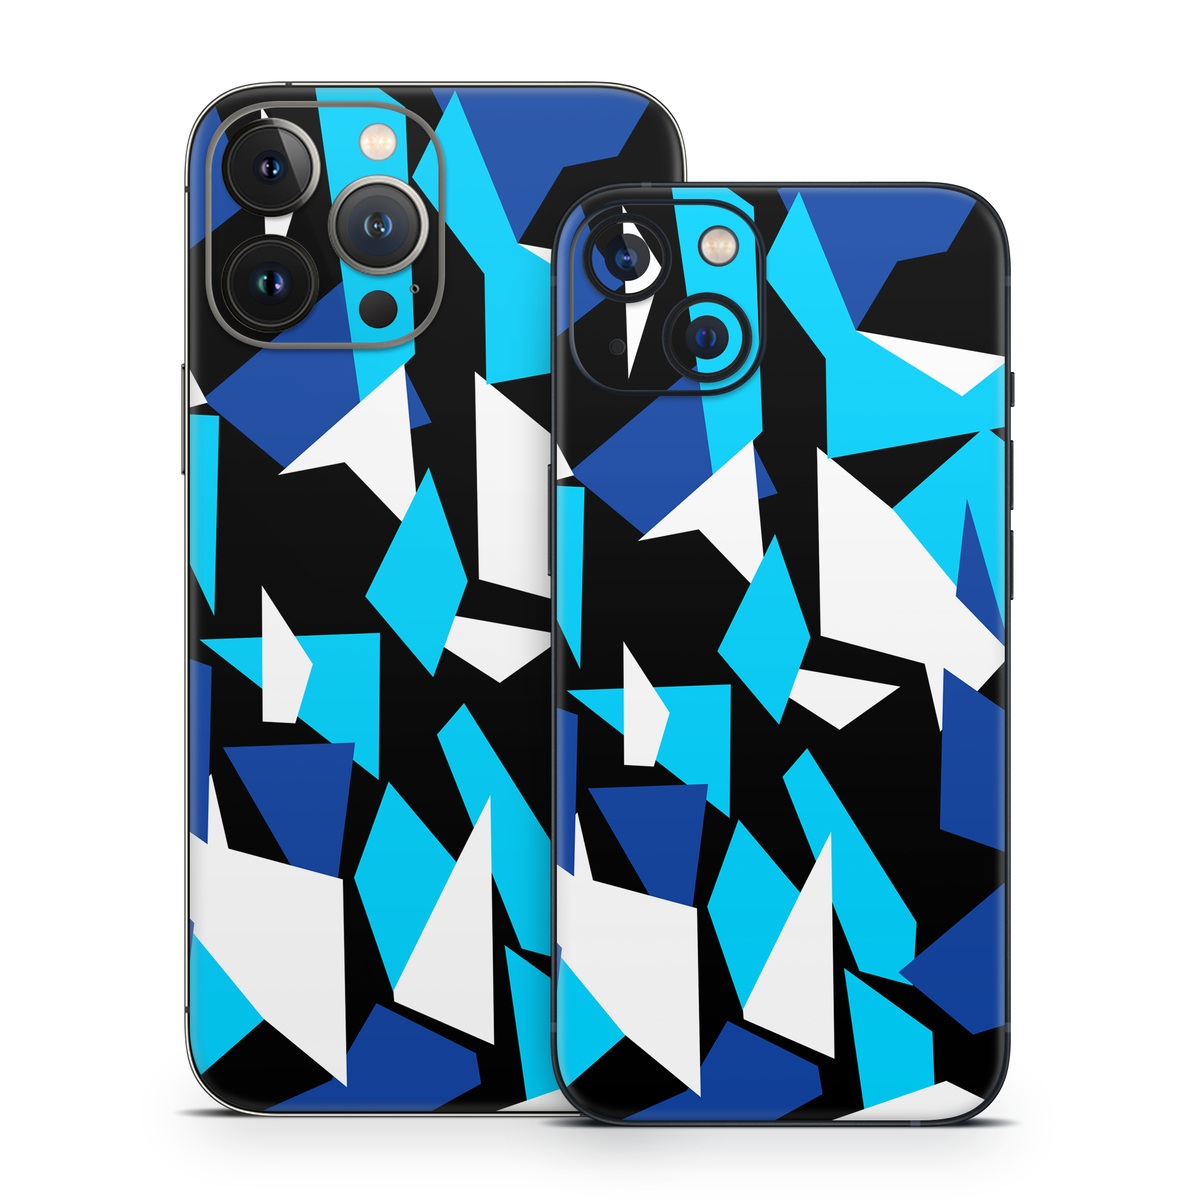 iPhone 13 Series Skin design of Blue, Pattern, Turquoise, Cobalt blue, Teal, Design, Electric blue, Graphic design, Triangle, Font, with blue, white, black colors